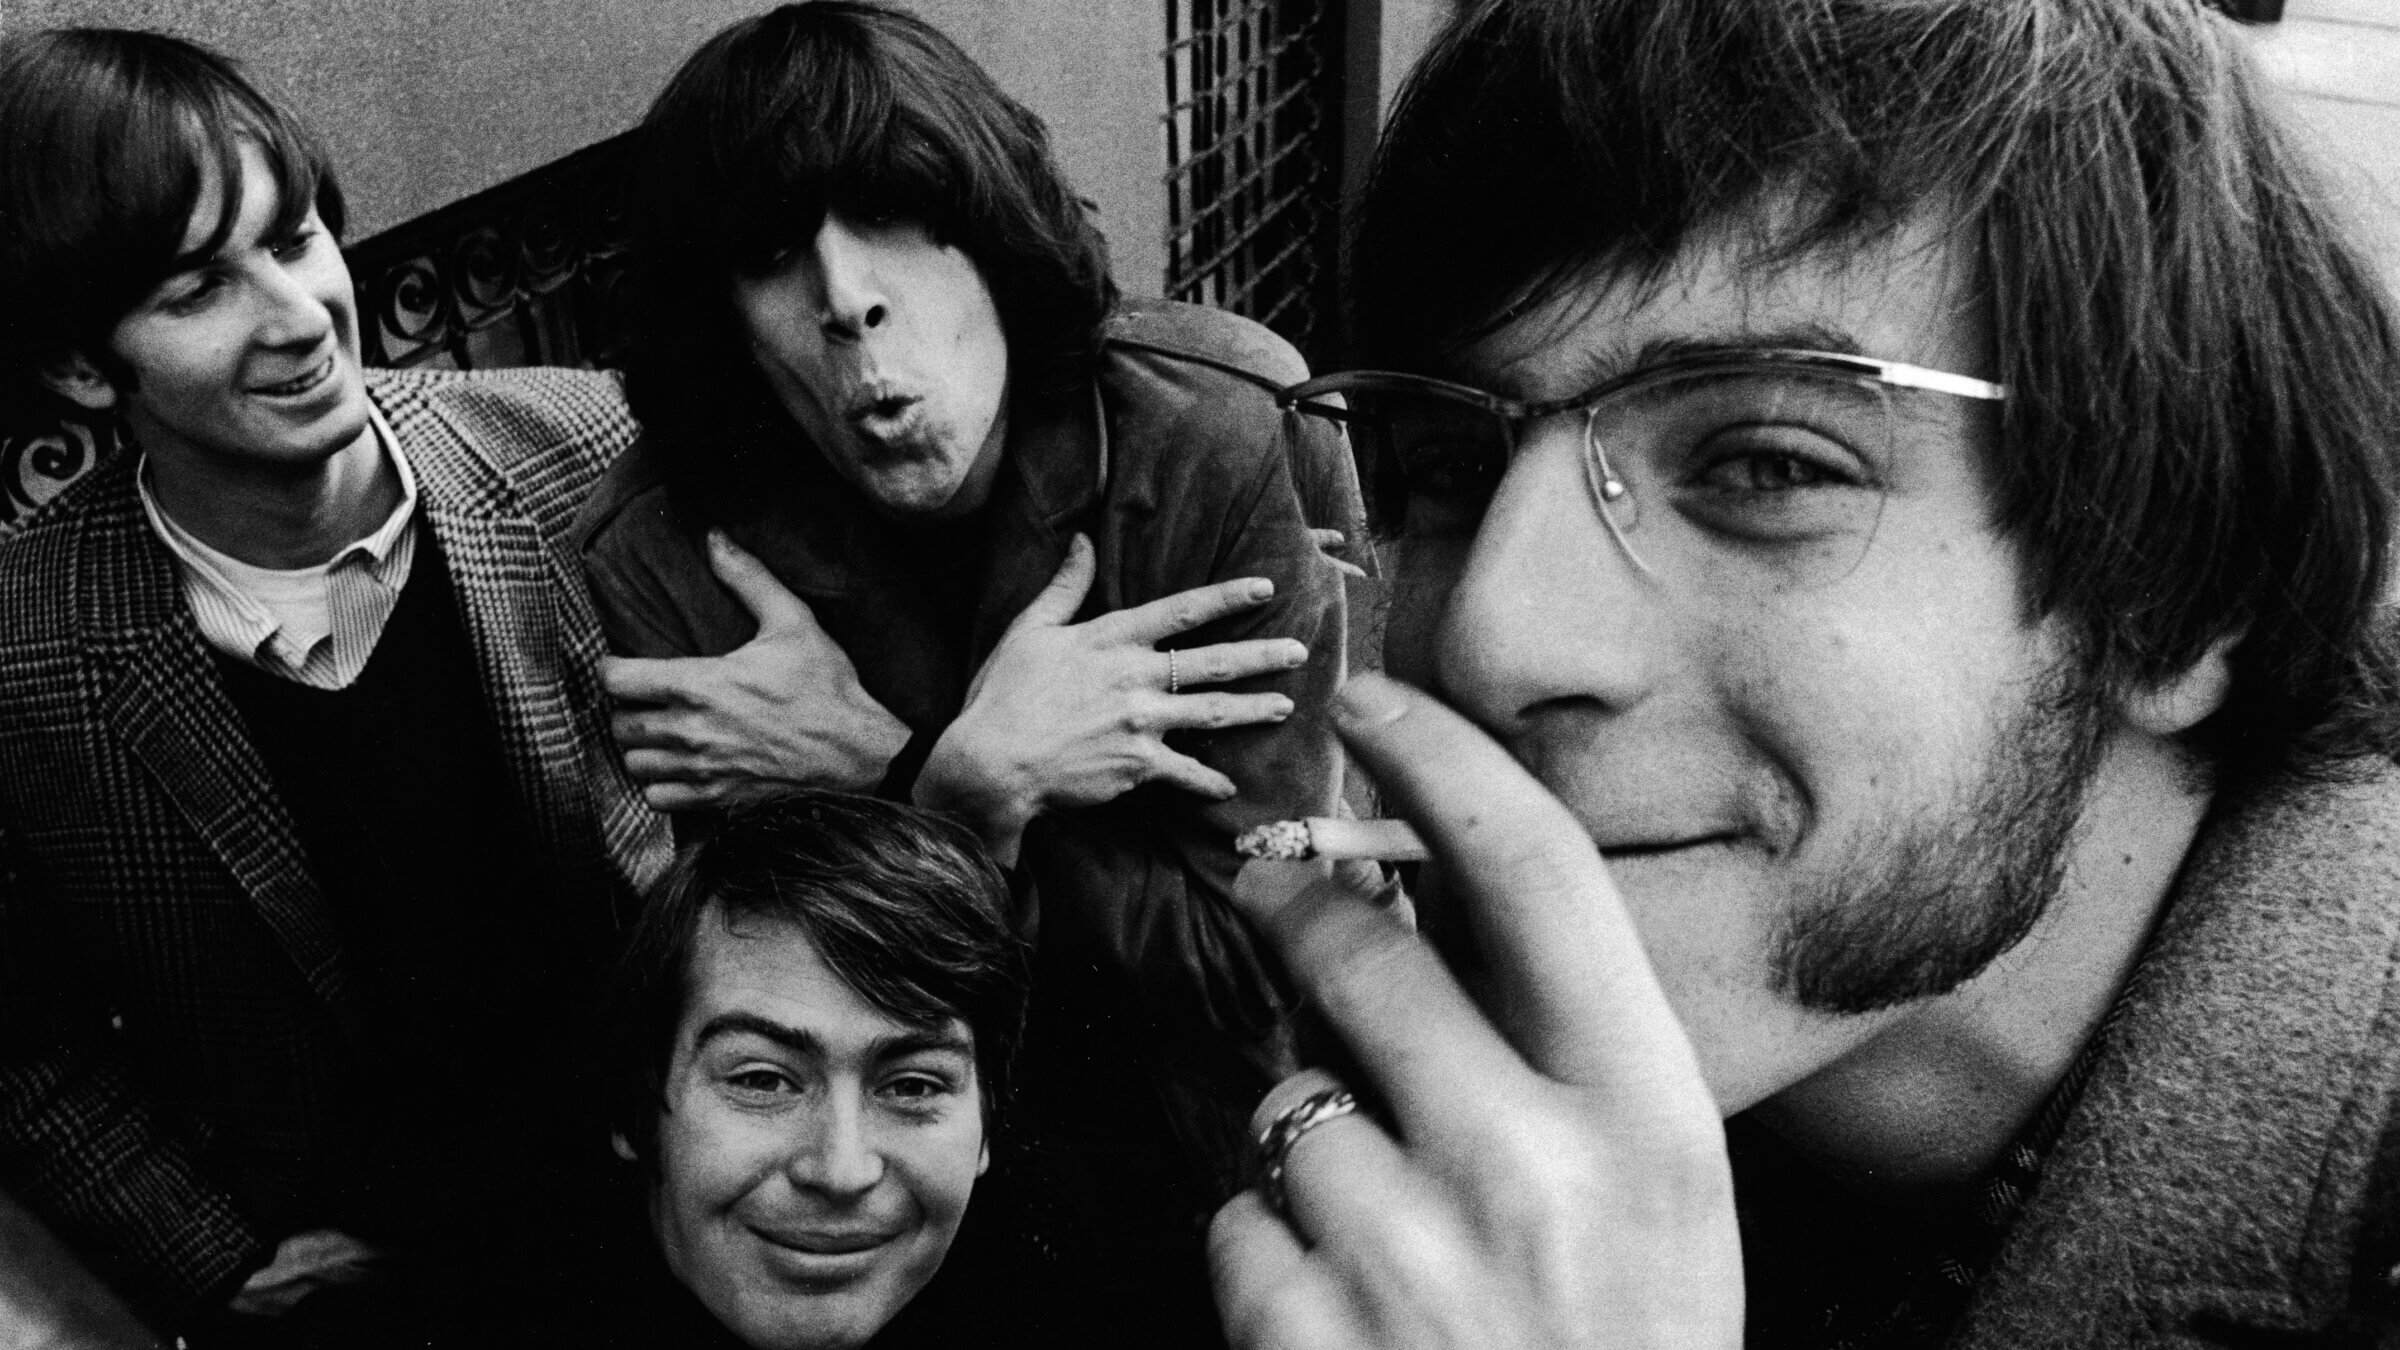  The Lovin' Spoonful pose on a street in the 1960s. Clockwise from bottom: drummer Joe Butler, bassist Steve Boone, co-founder and lead guitarist Zal Yanovsky and co-founder and singer John Sebastian. 